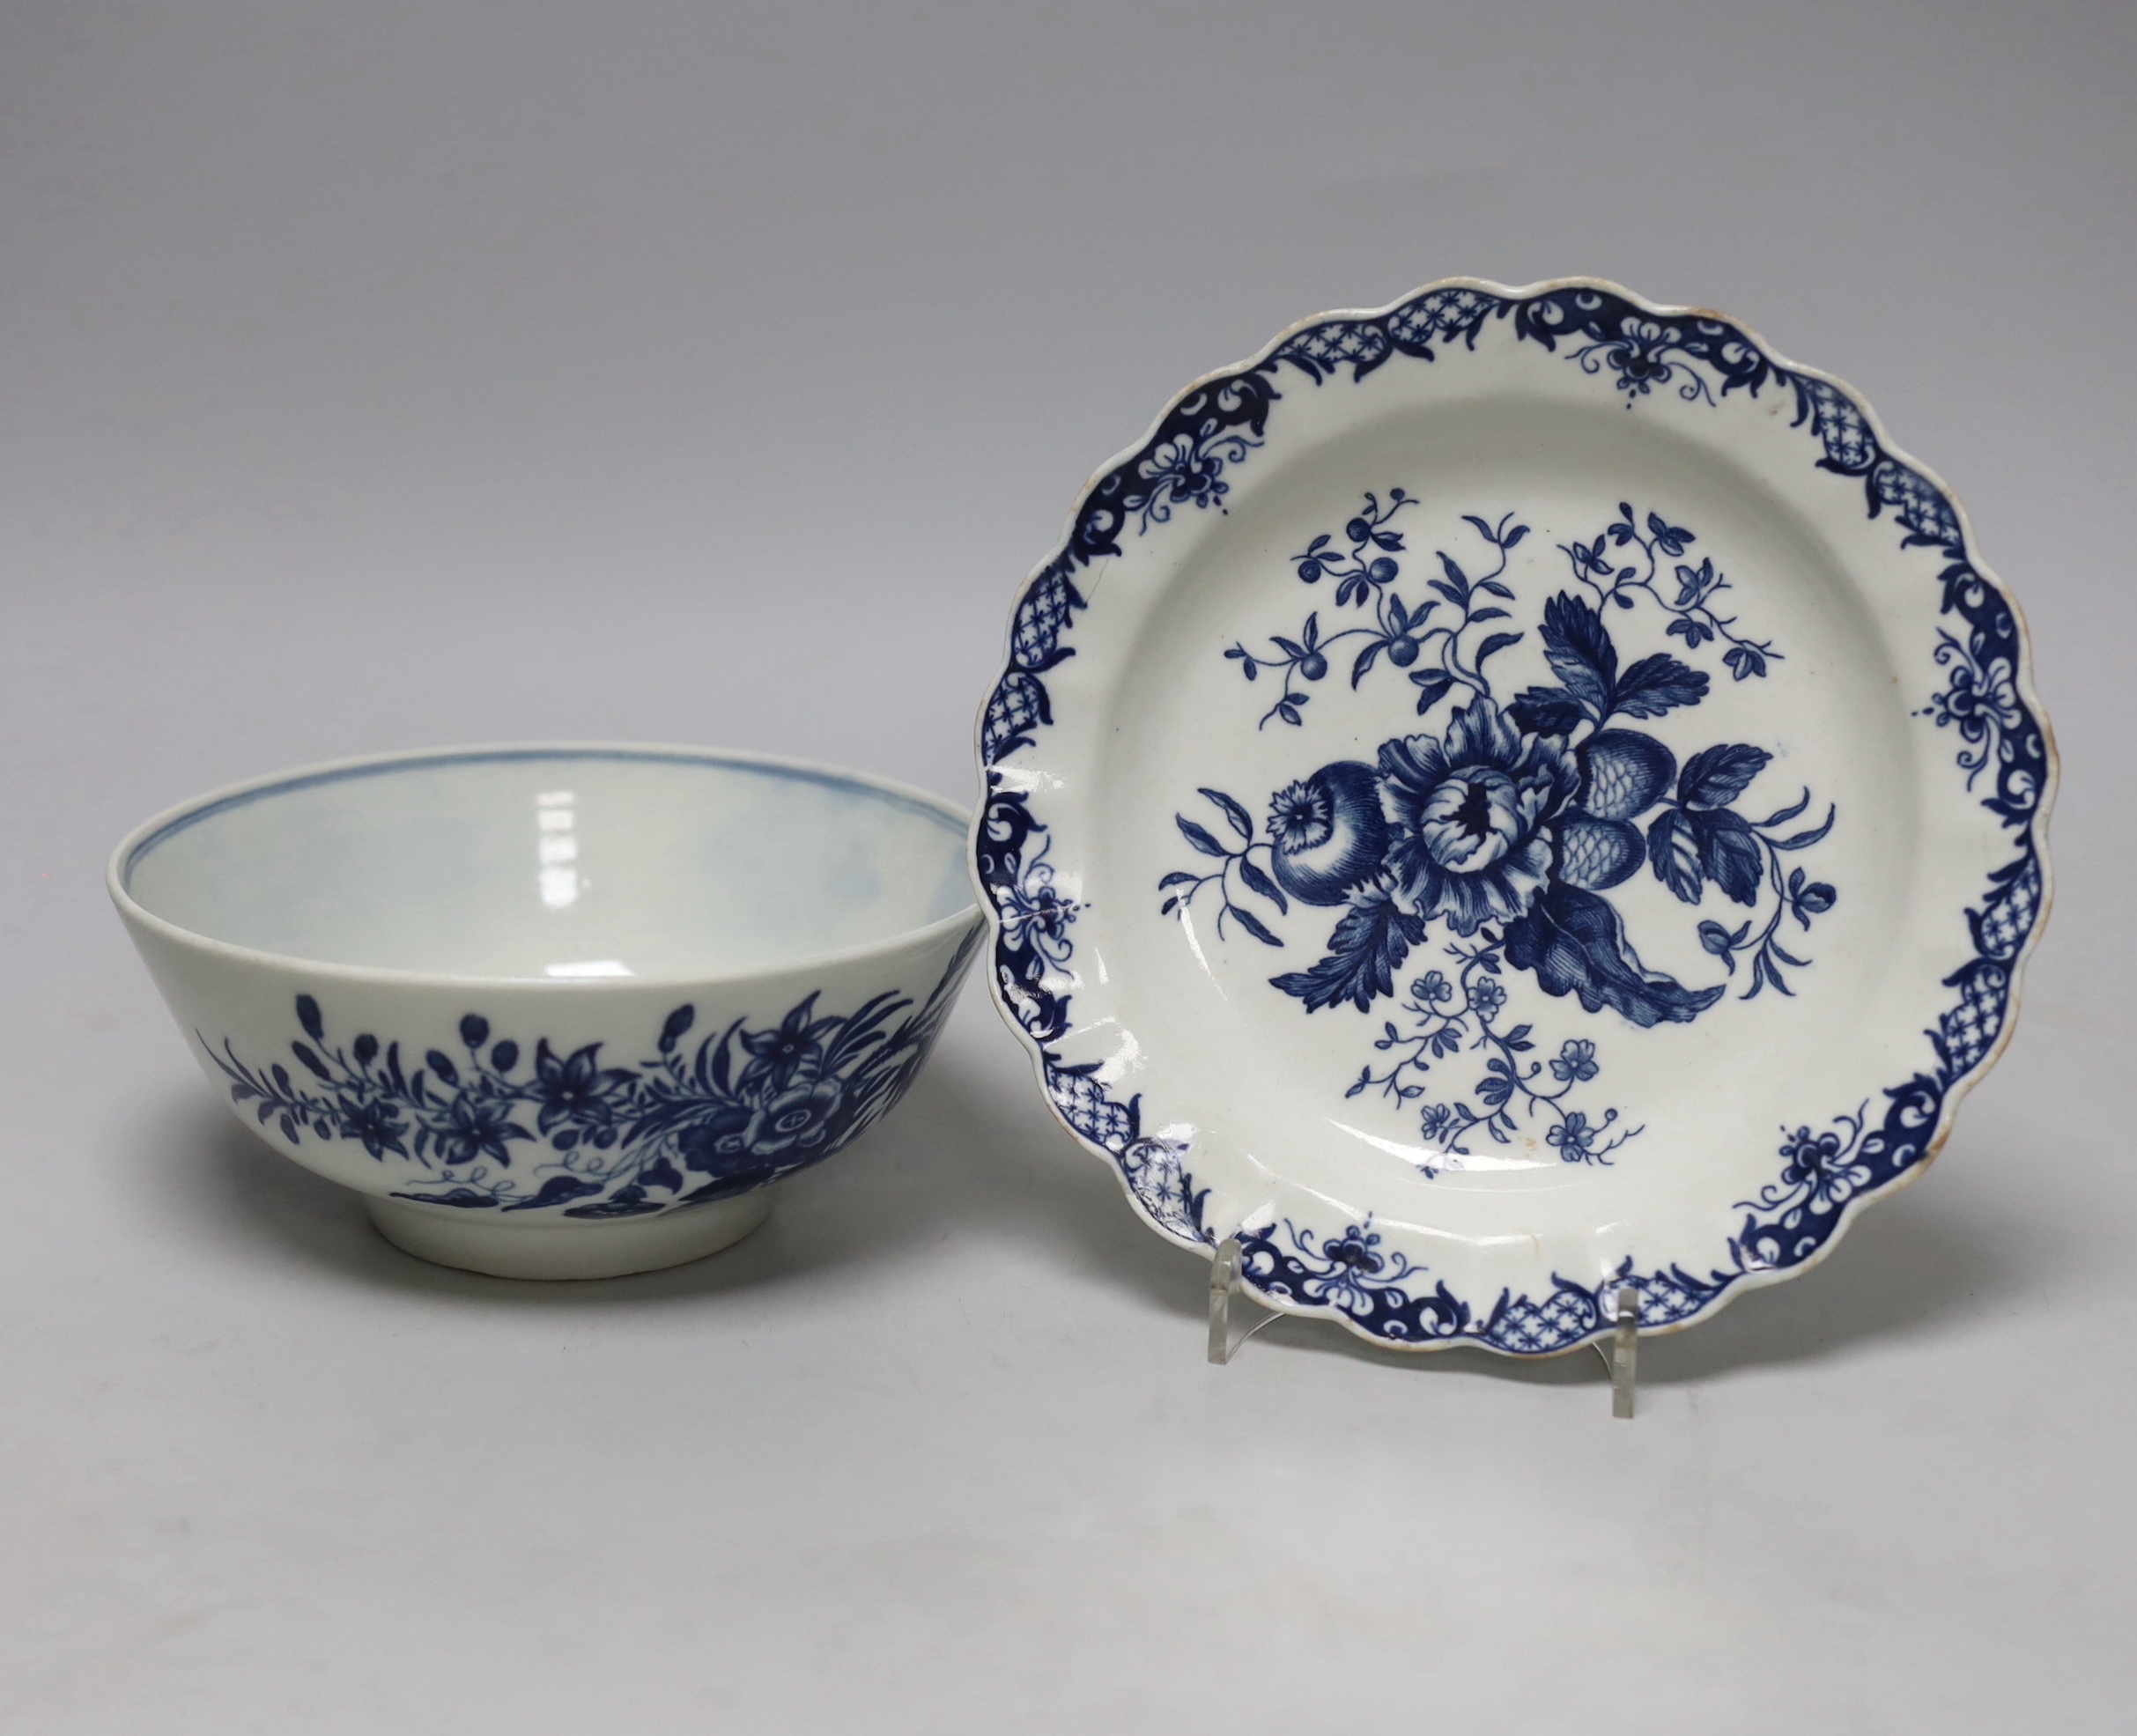 A Worcester Three Flowers pattern bowl and a Pine Cone pattern plate